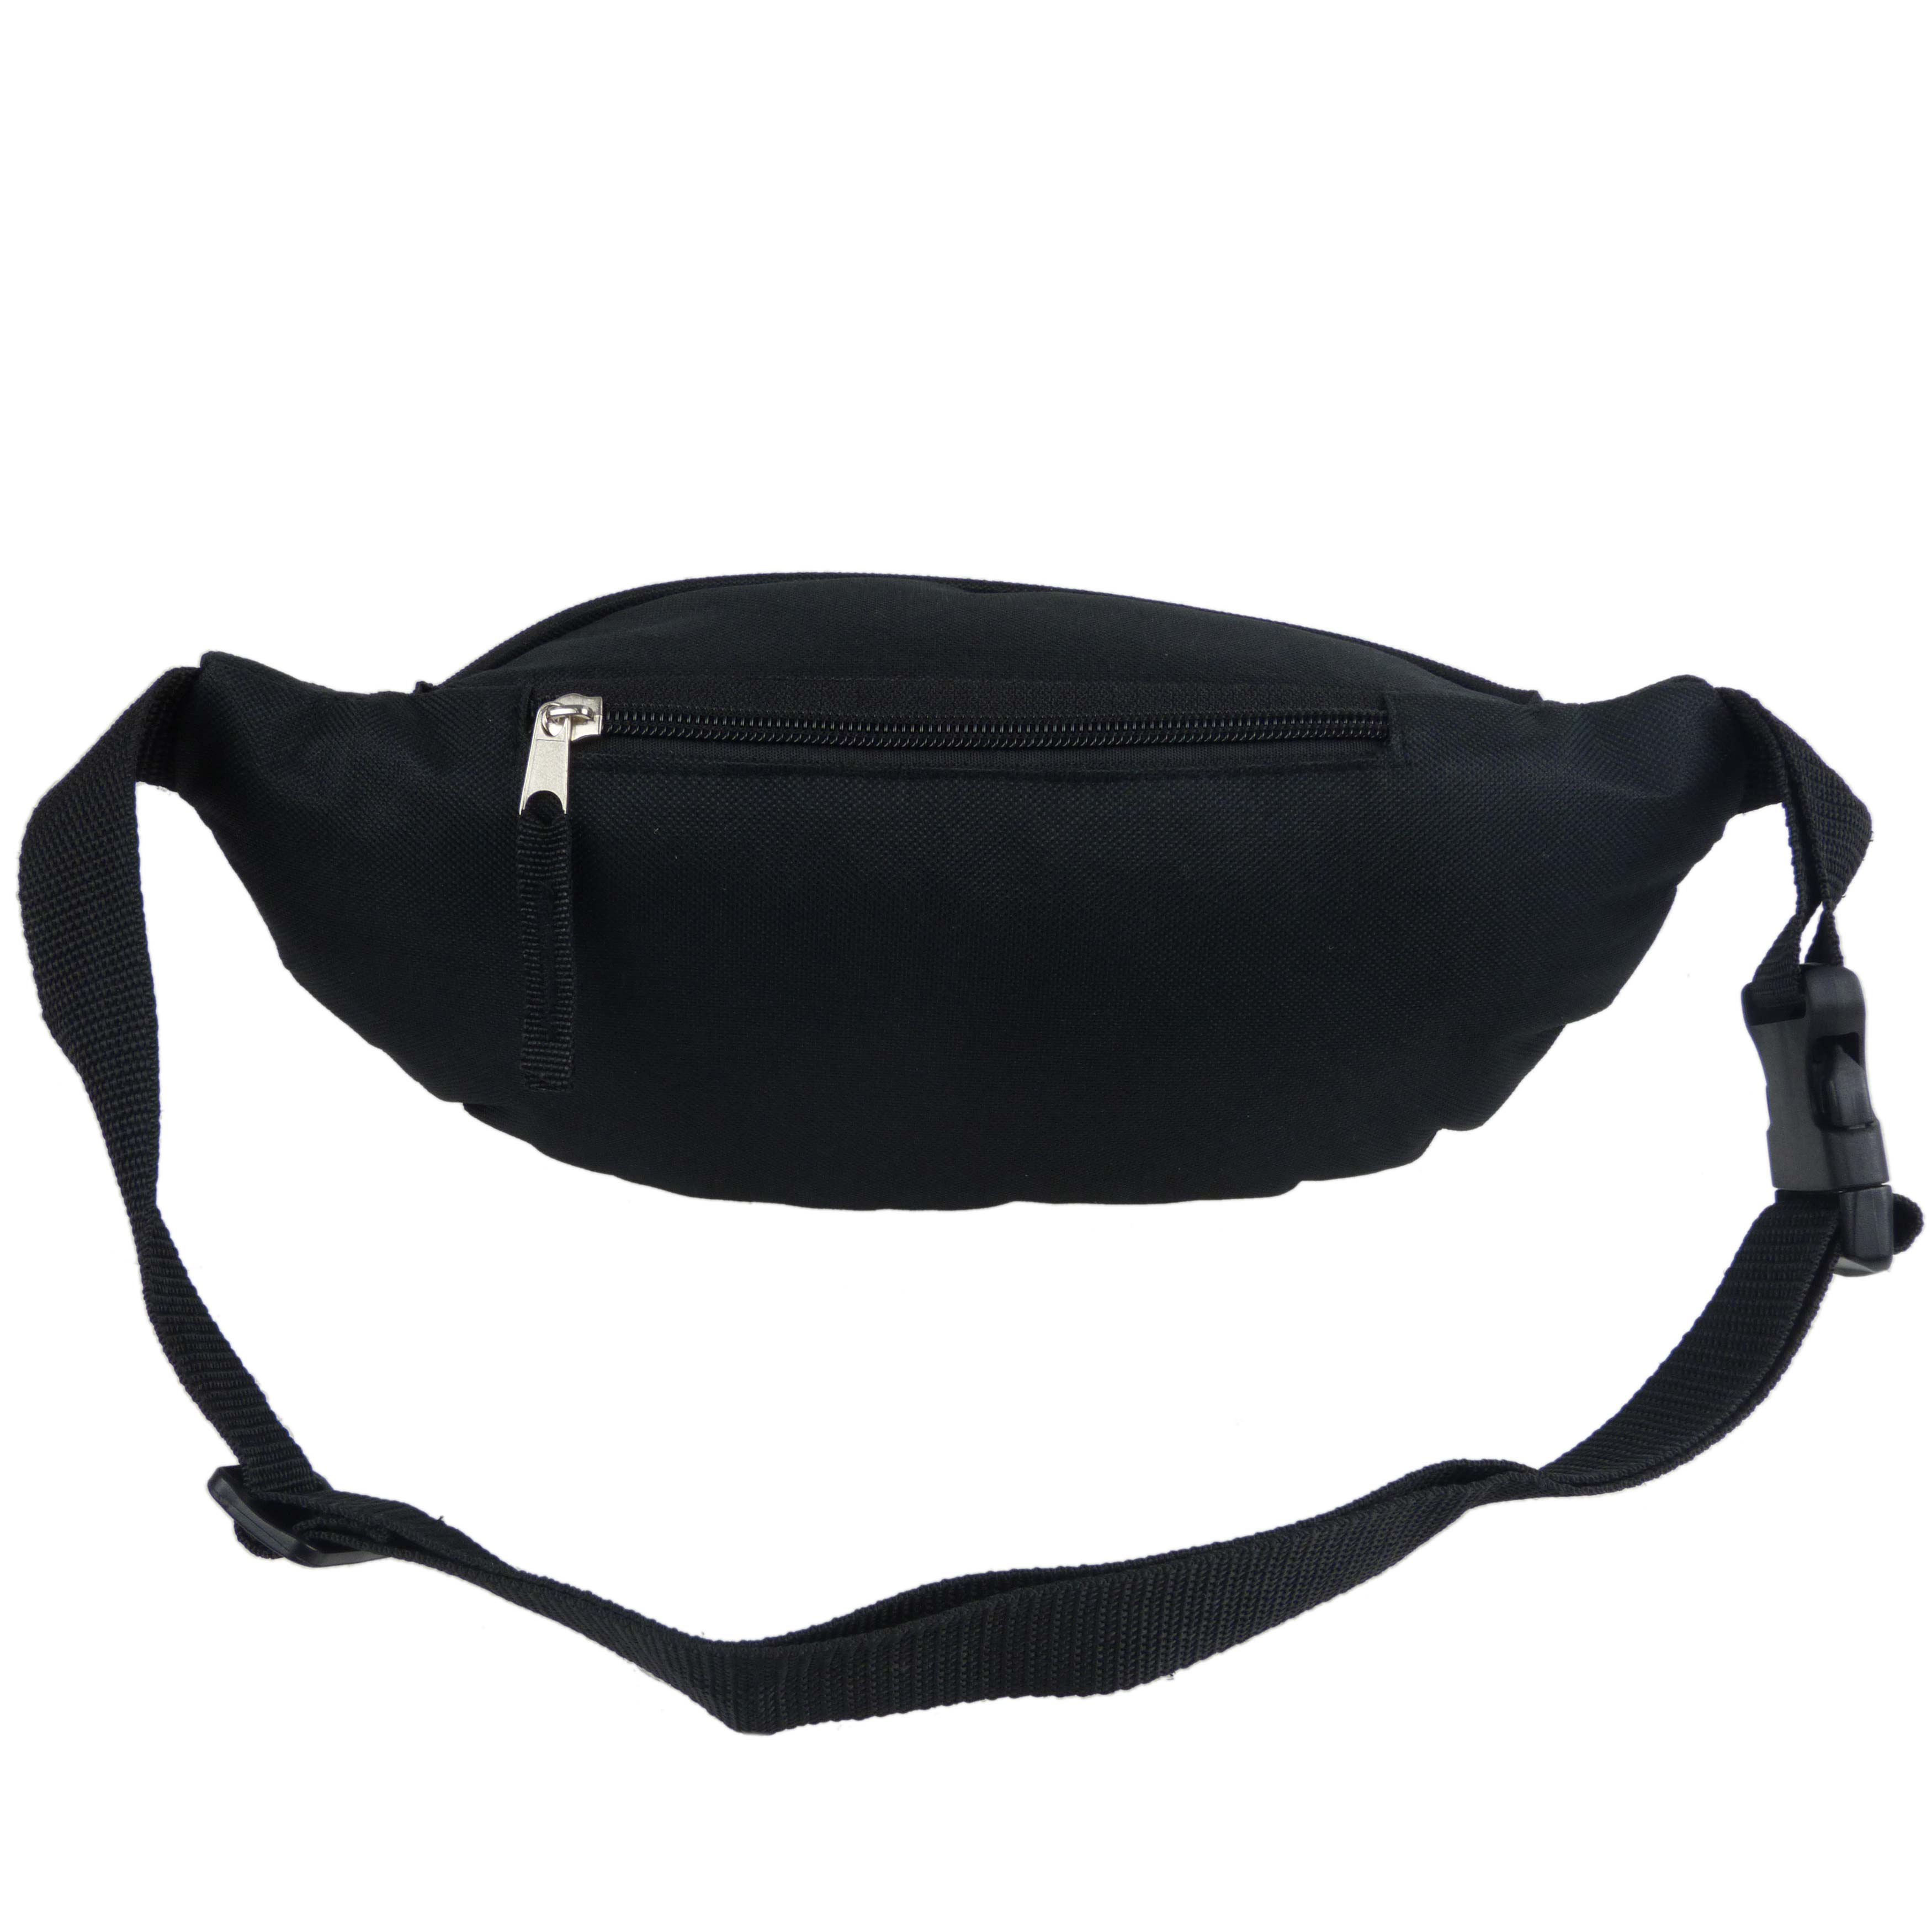 Unisex Canvas Large Bum Bag by RED X Travel Fanny Pack Waist 7 Pockets ...